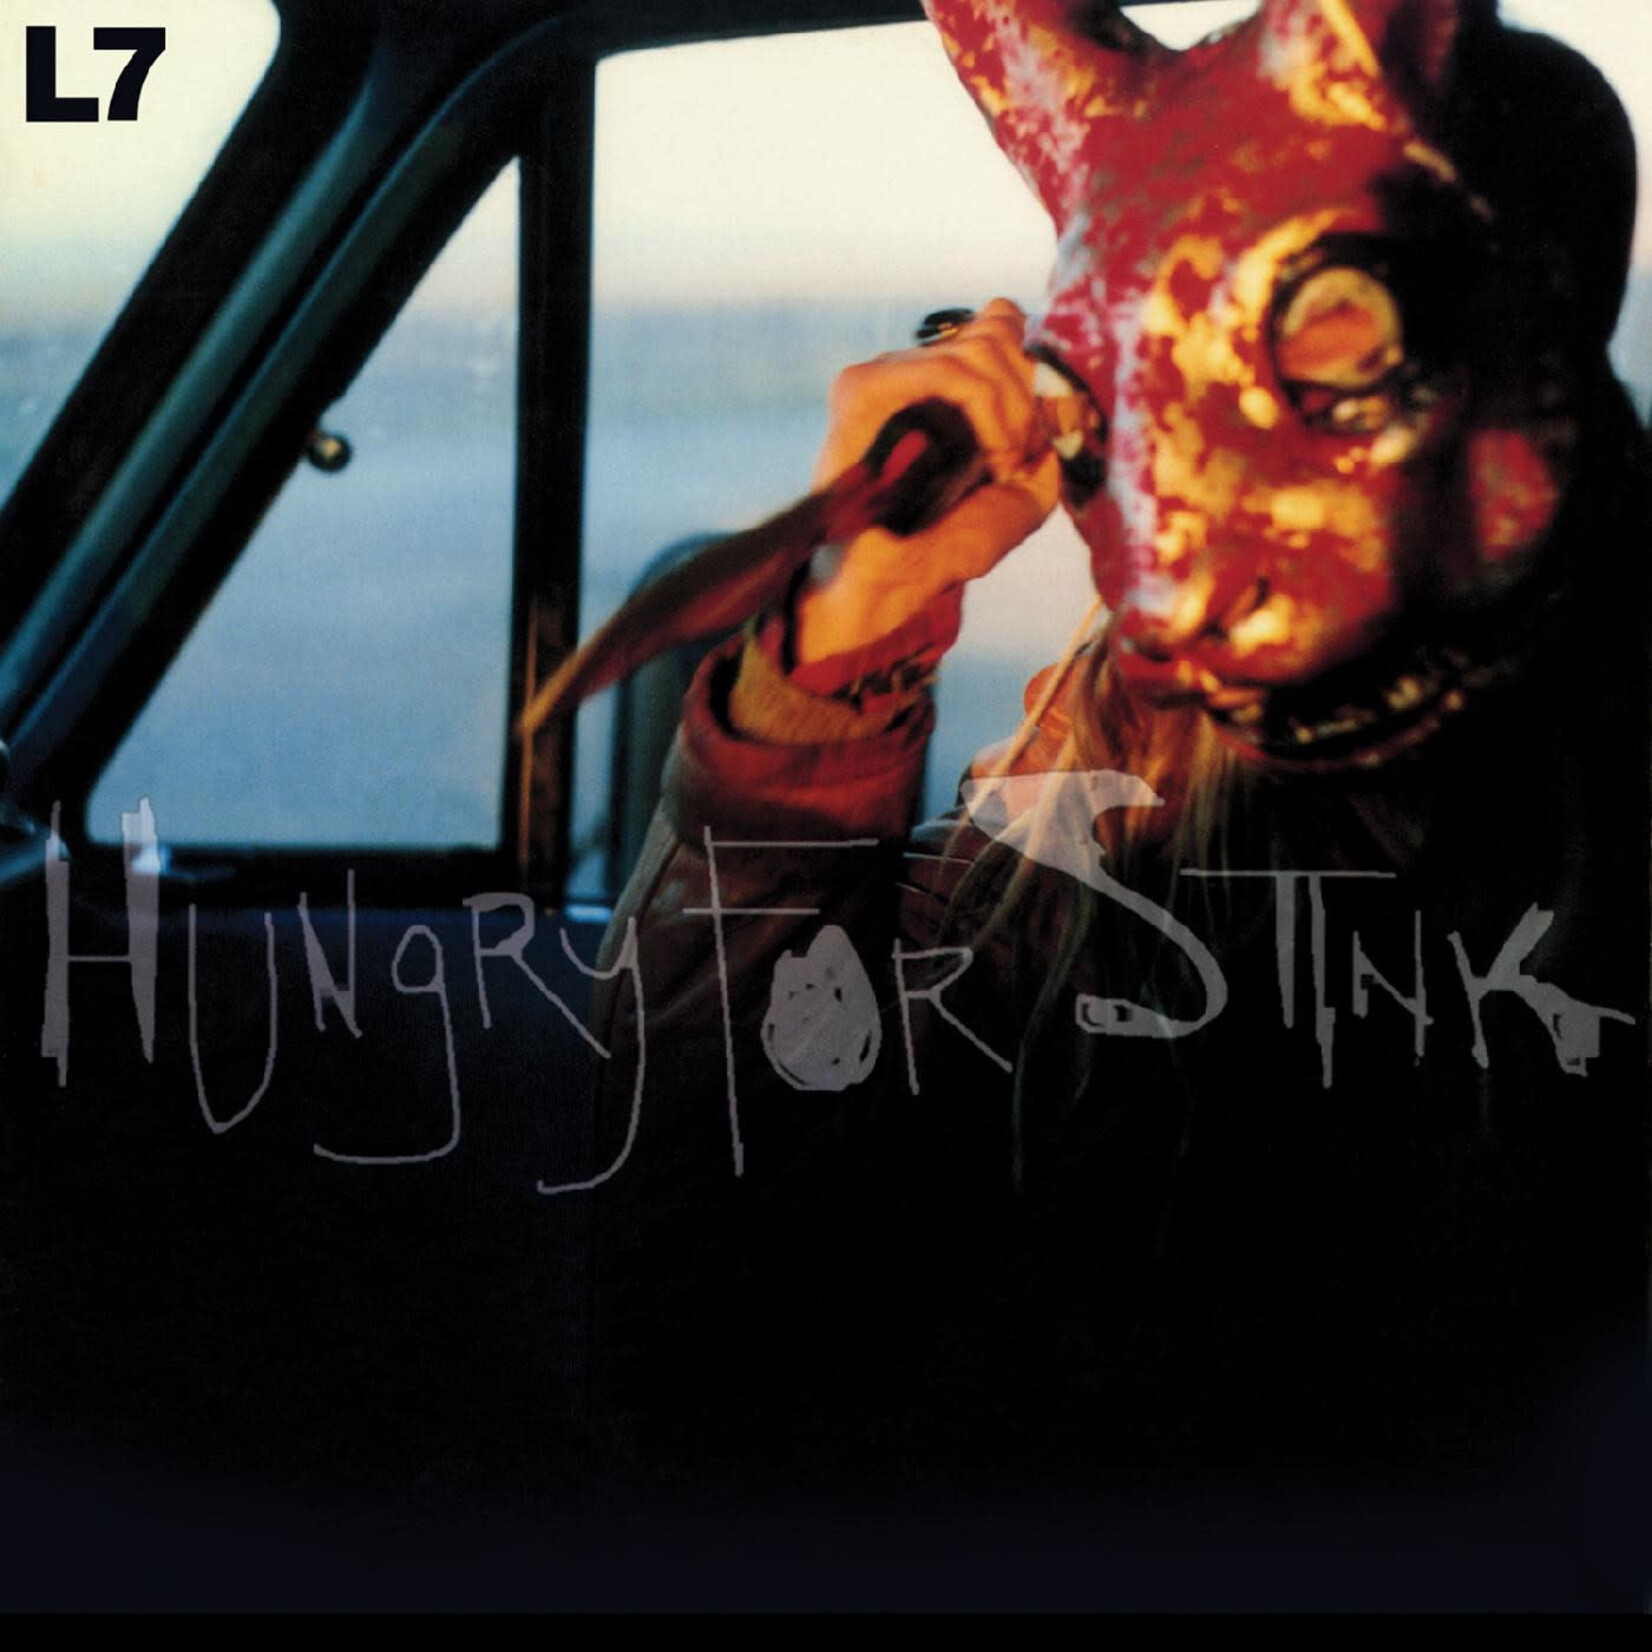 L7 - Hungry For Stink (Clear/Red Vinyl) [LP]